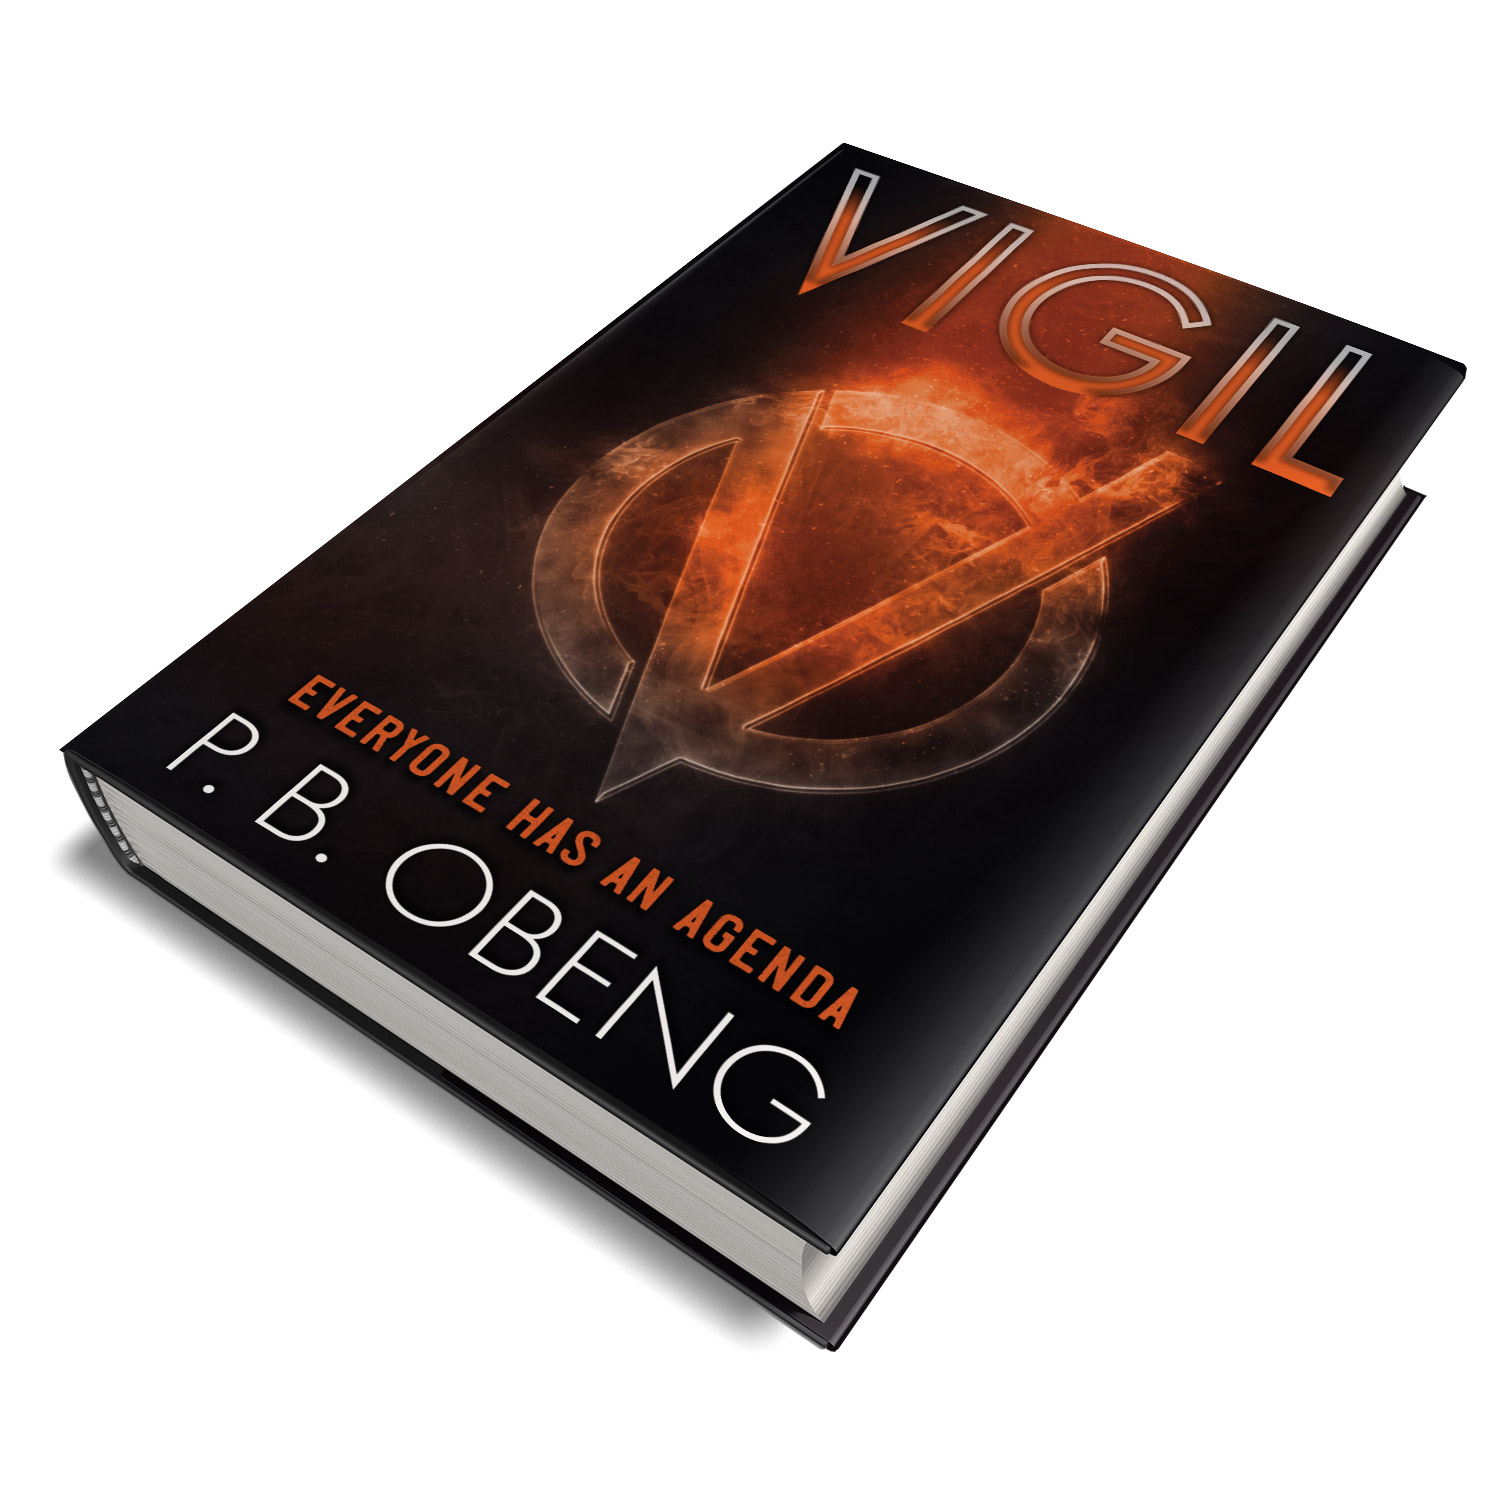 'Vigil' is a superhero-powered sci-fi, by P B Obeng. The book cover and interior were designed by Mark Thomas, of coverness.com. To find out more about my book design services, please visit www.coverness.com.